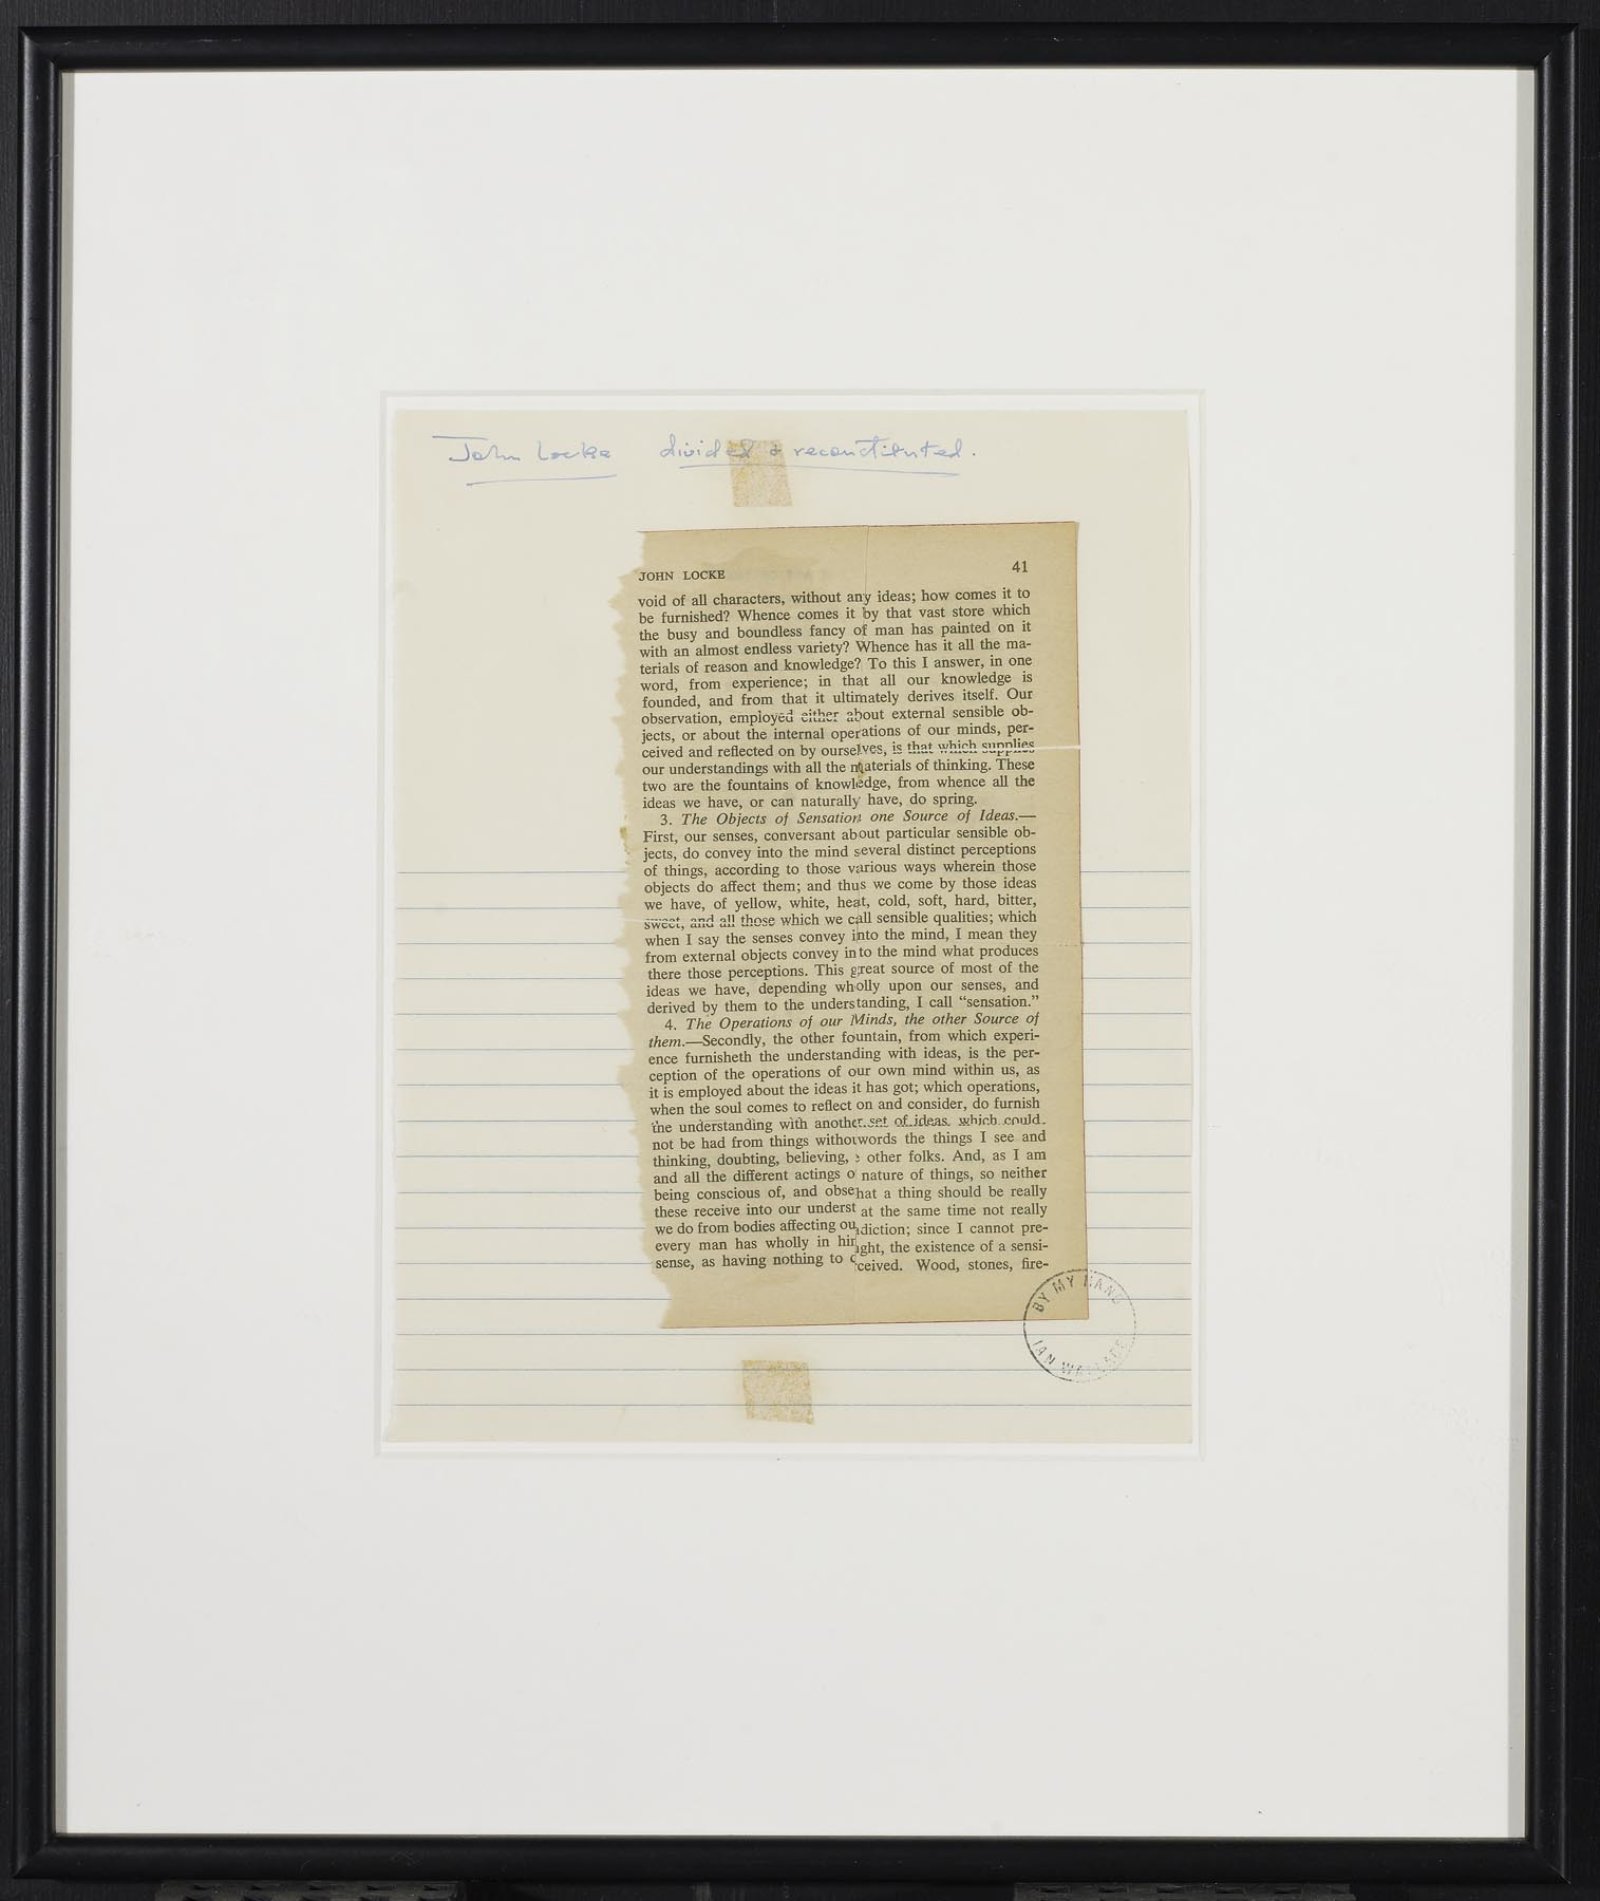 Ian Wallace, John Locke Divided and Reconstituted, 1969, printed page collage, 9 x7 in. (23 x 18 cm)